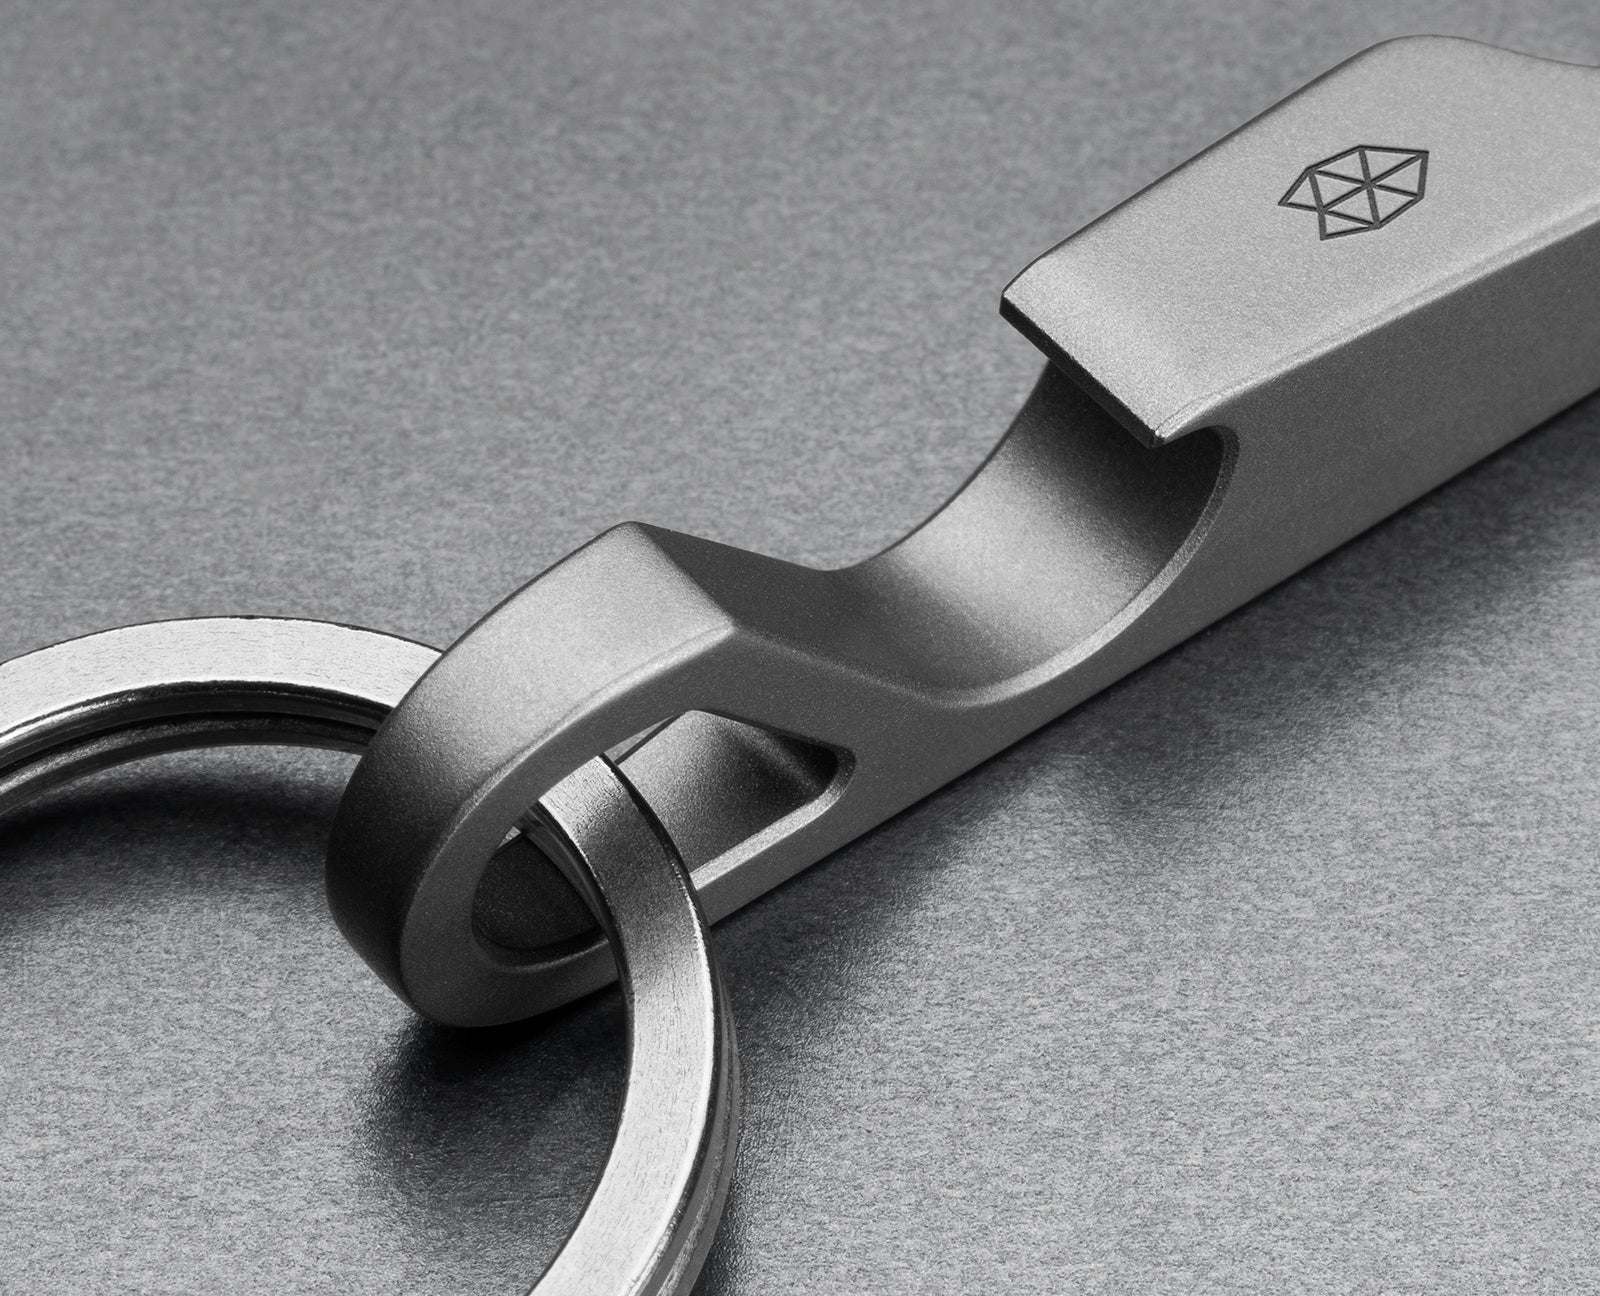 Titanium Key Ring for Keychain EDC Quick Release Made in USA by Imre Zsolt  — Kickstarter